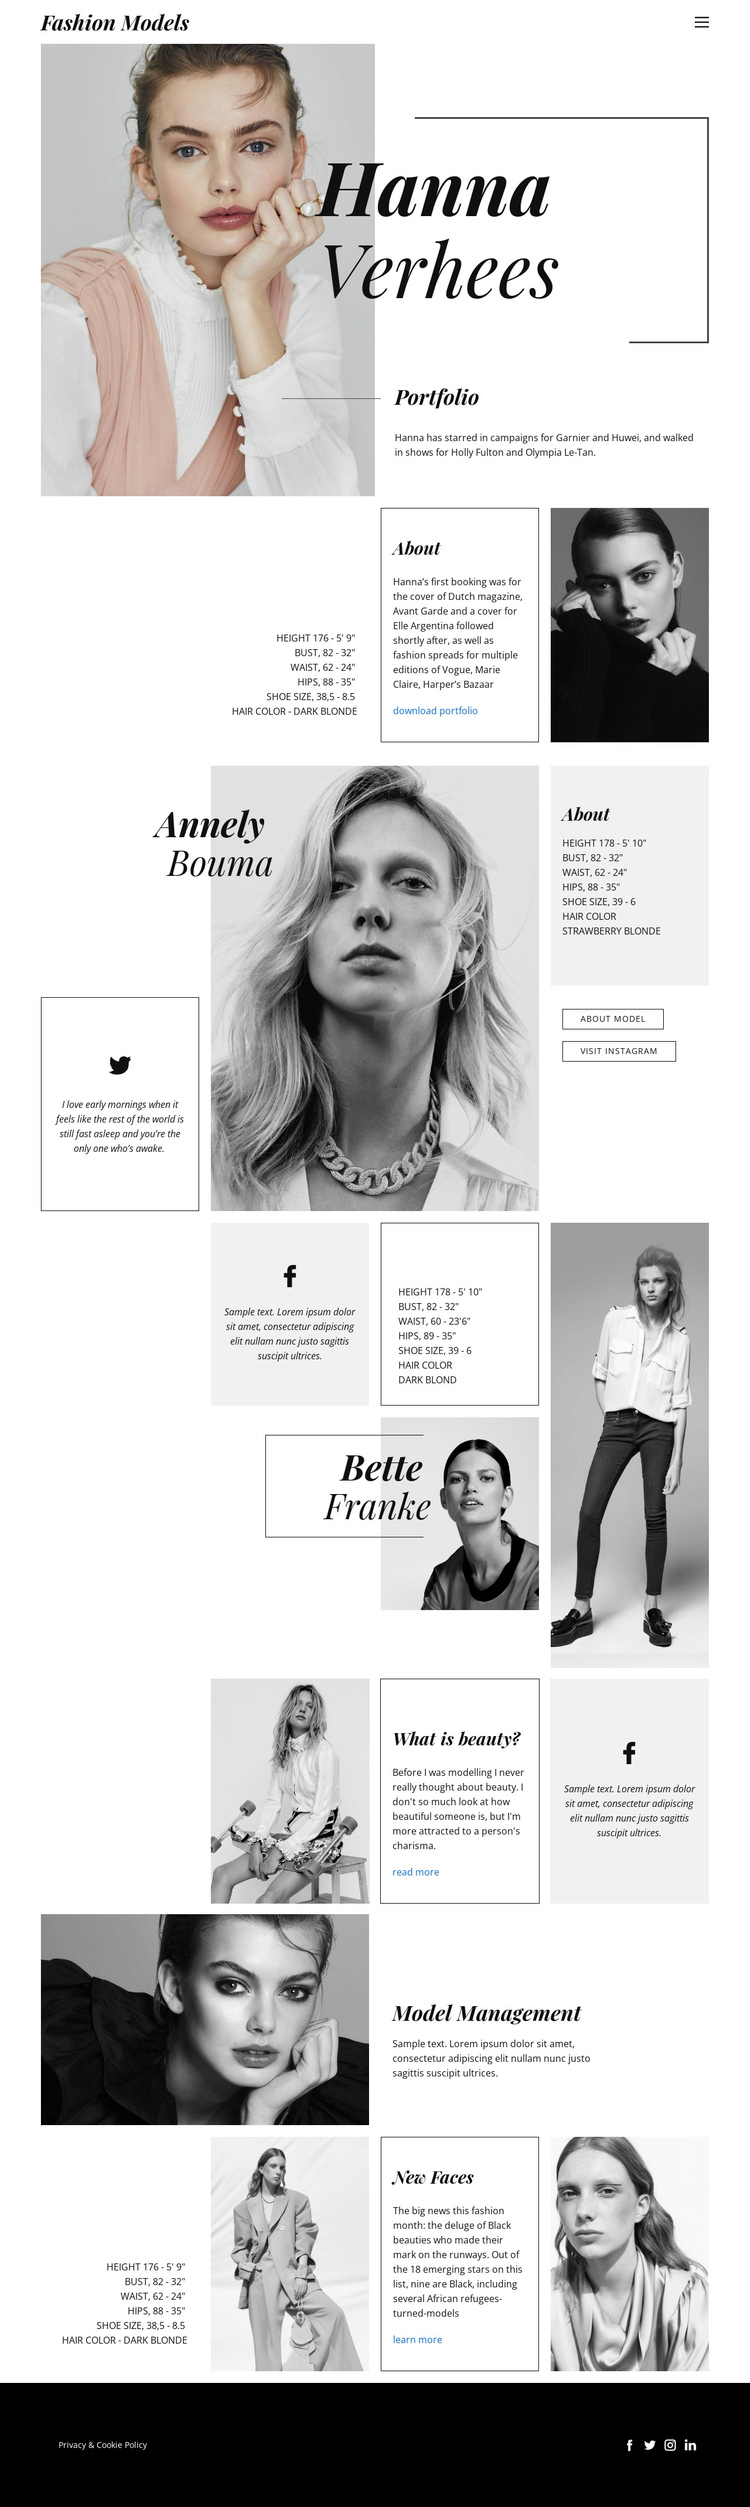 Hanna Verhees Blog One Page Template